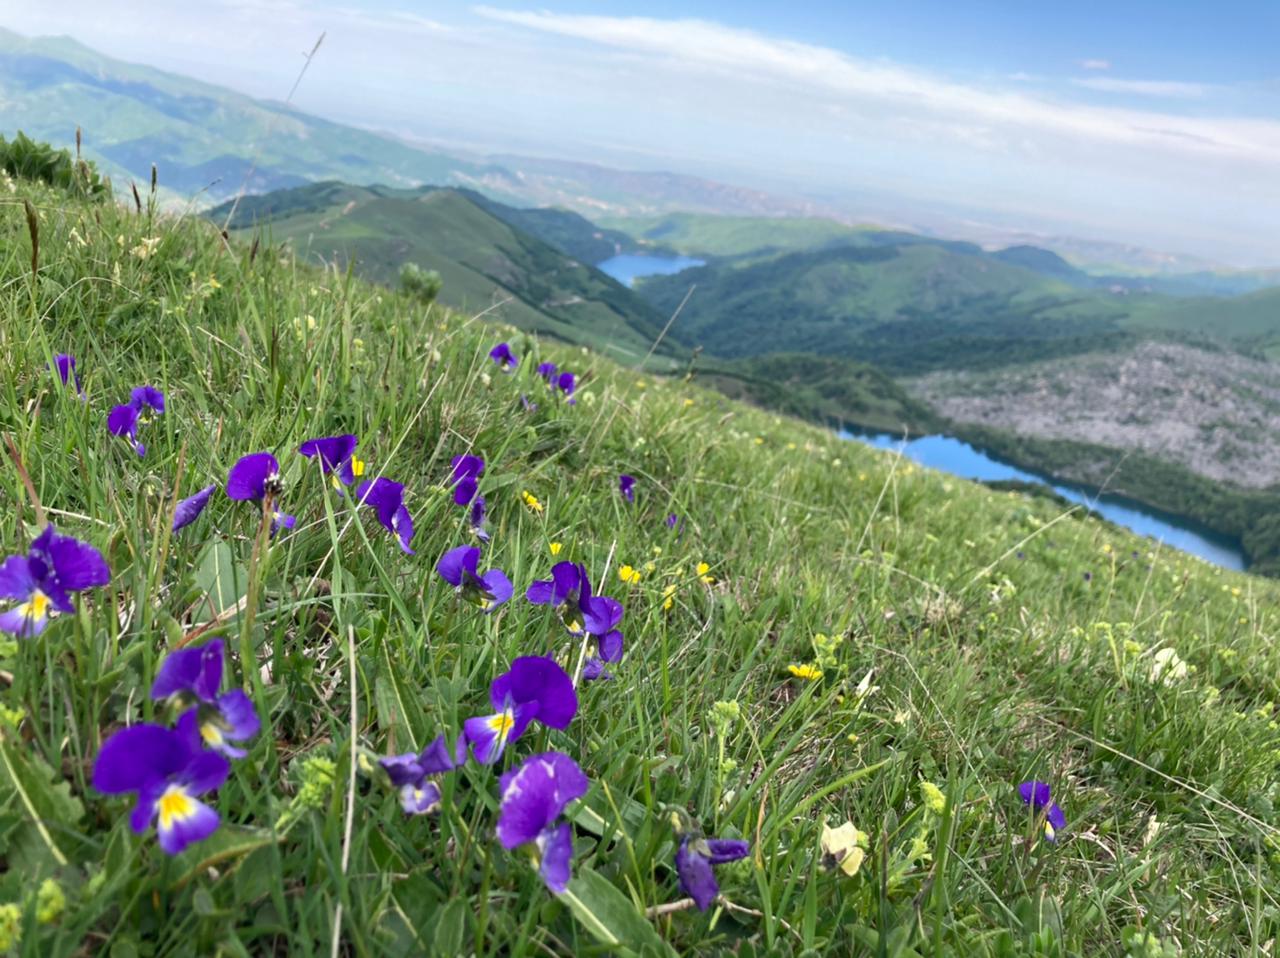 A far reaching view of lakes and mountains with a foreground close-up of specimens of purple and yellow flowers growing amongst lush grass on a steep incline